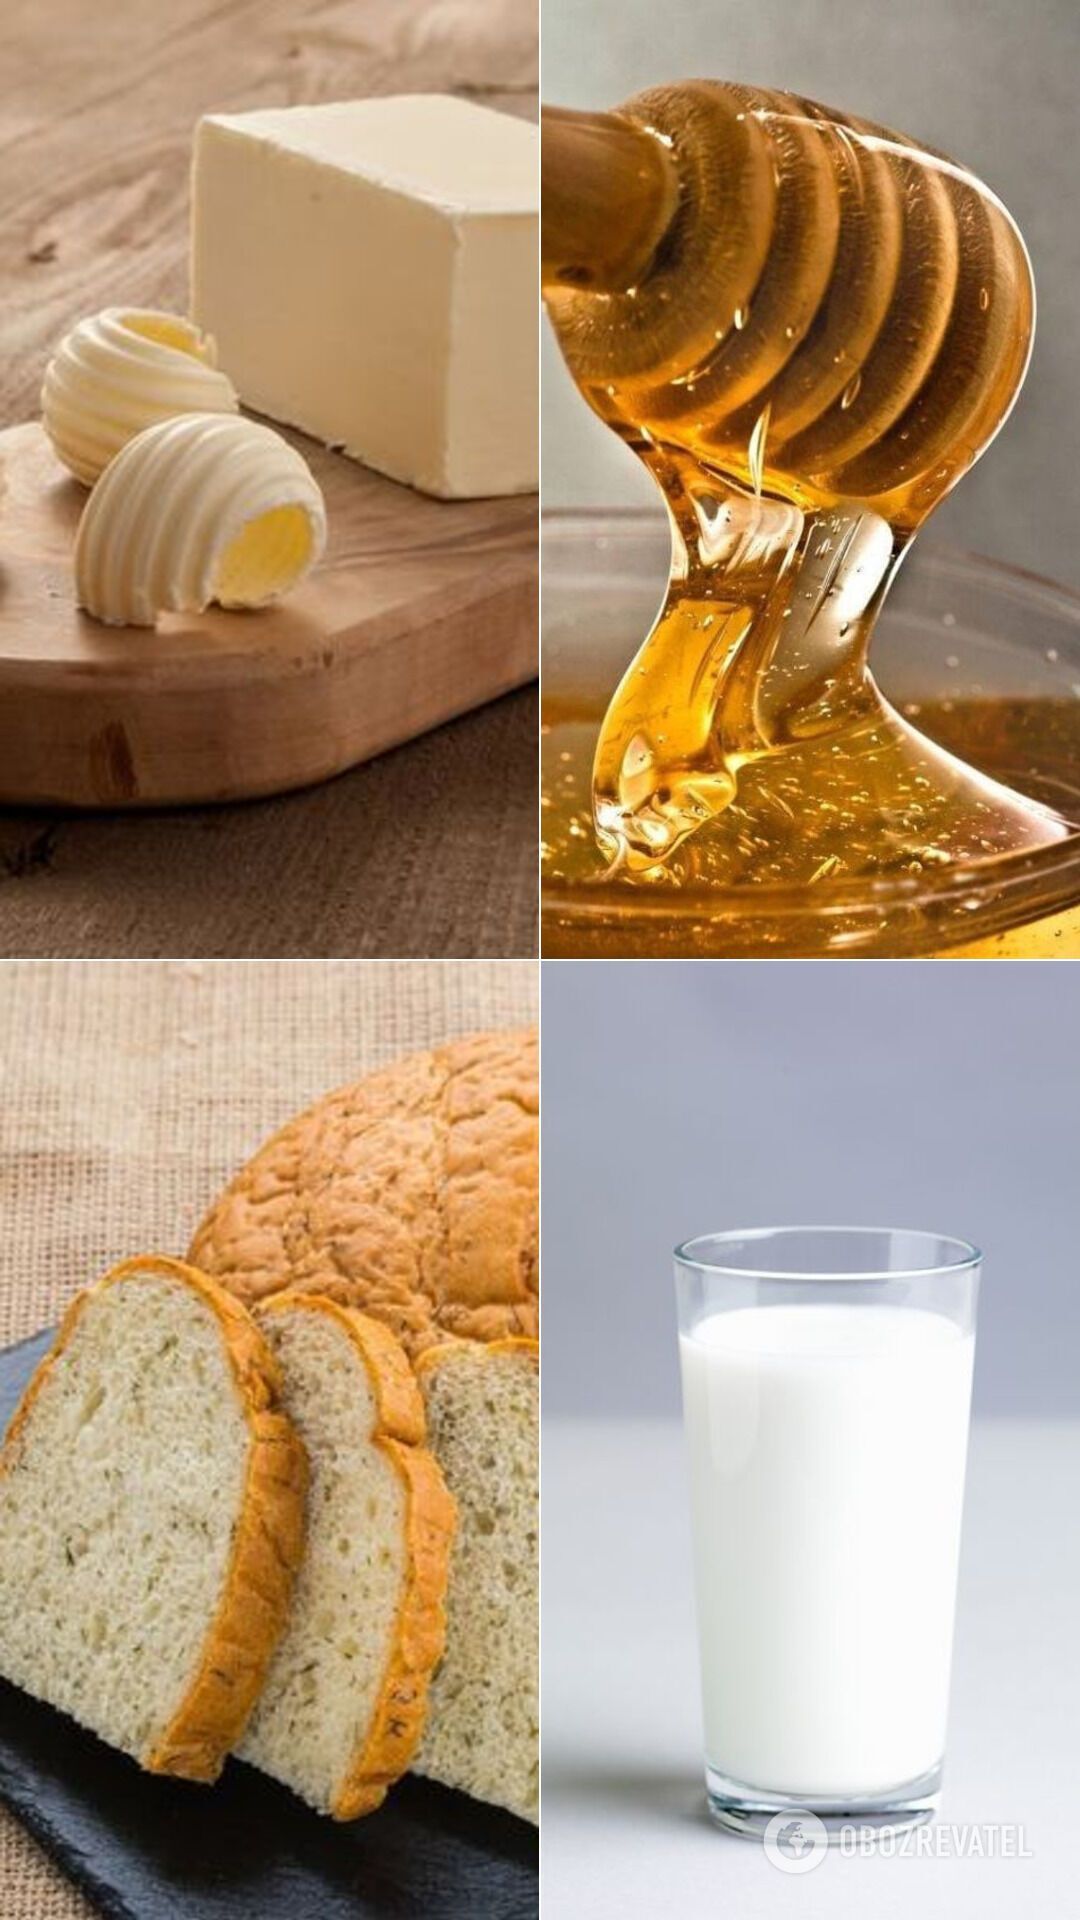 Combination of butter, milk, bread and honey